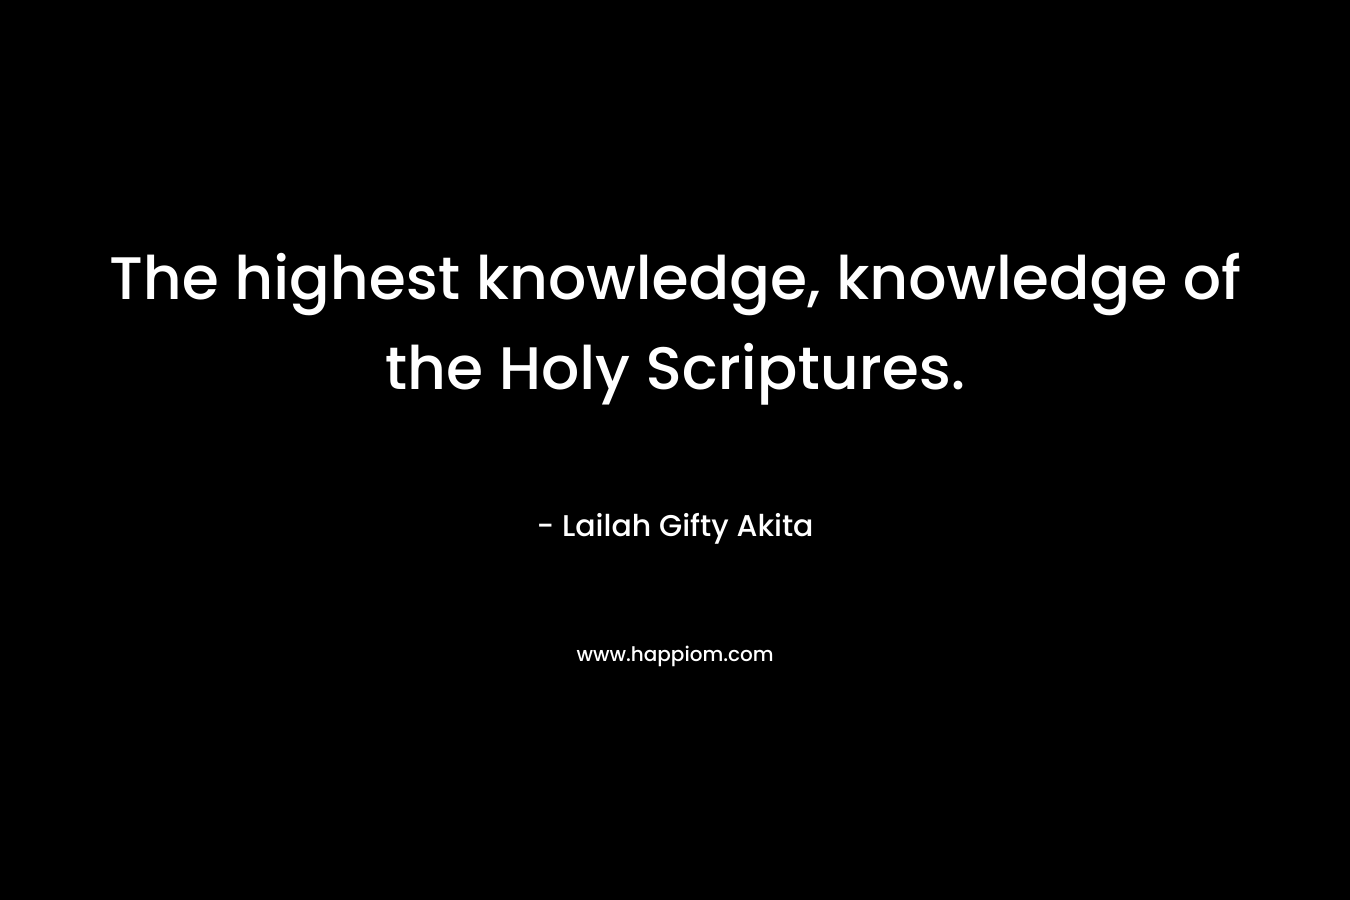 The highest knowledge, knowledge of the Holy Scriptures.